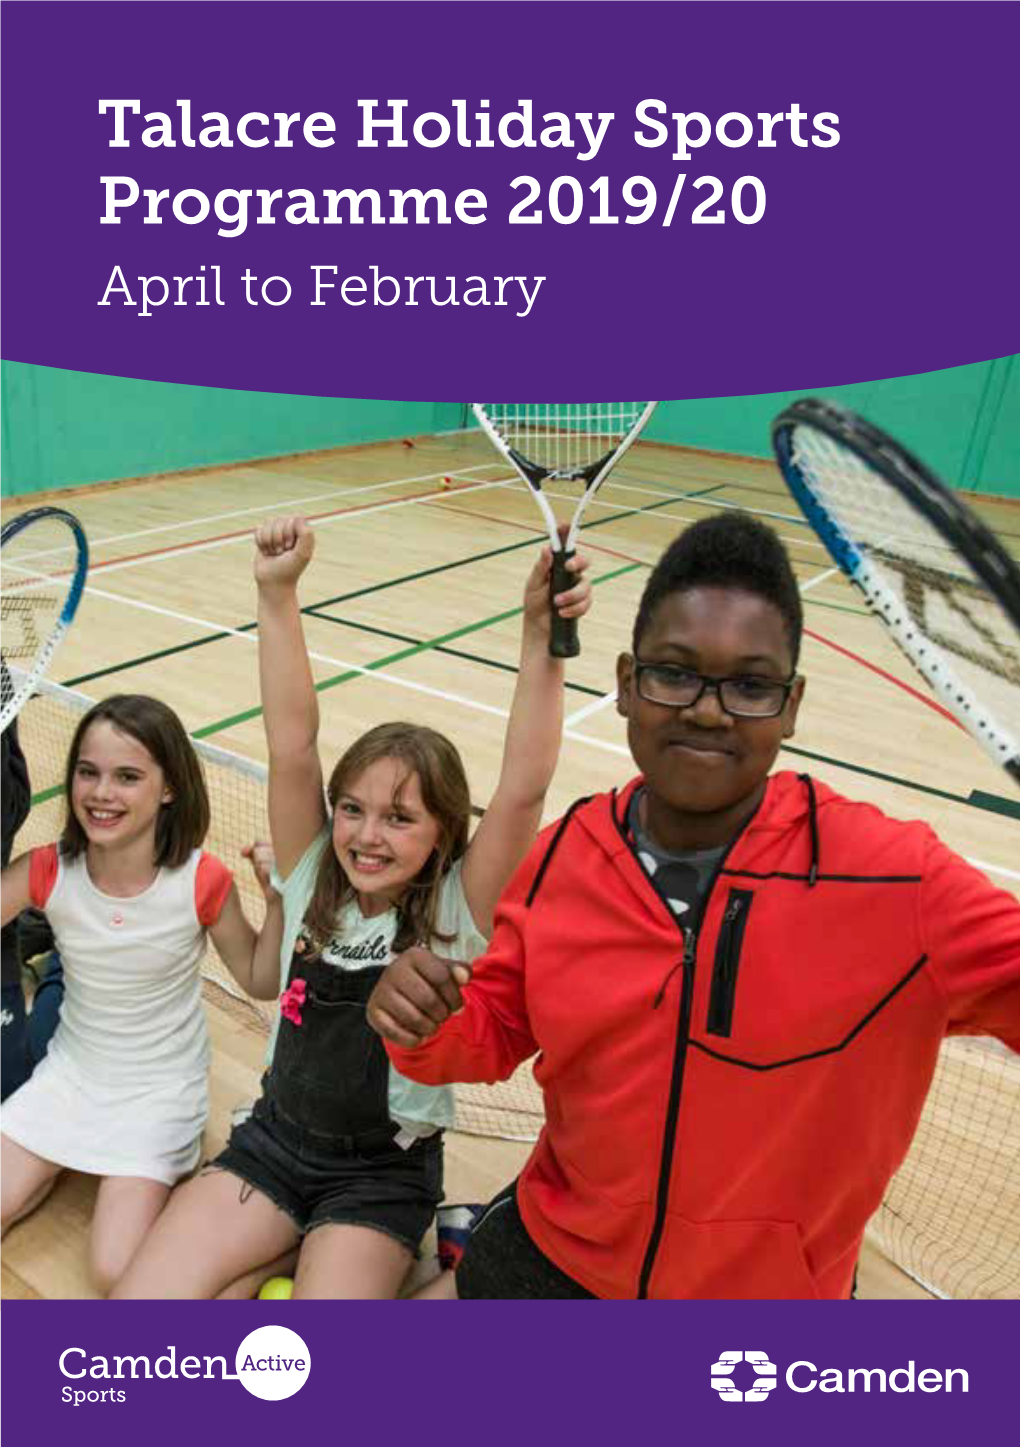 Talacre Holiday Sports Programme 2019/20 April to February 2019/20 Holiday Course Information